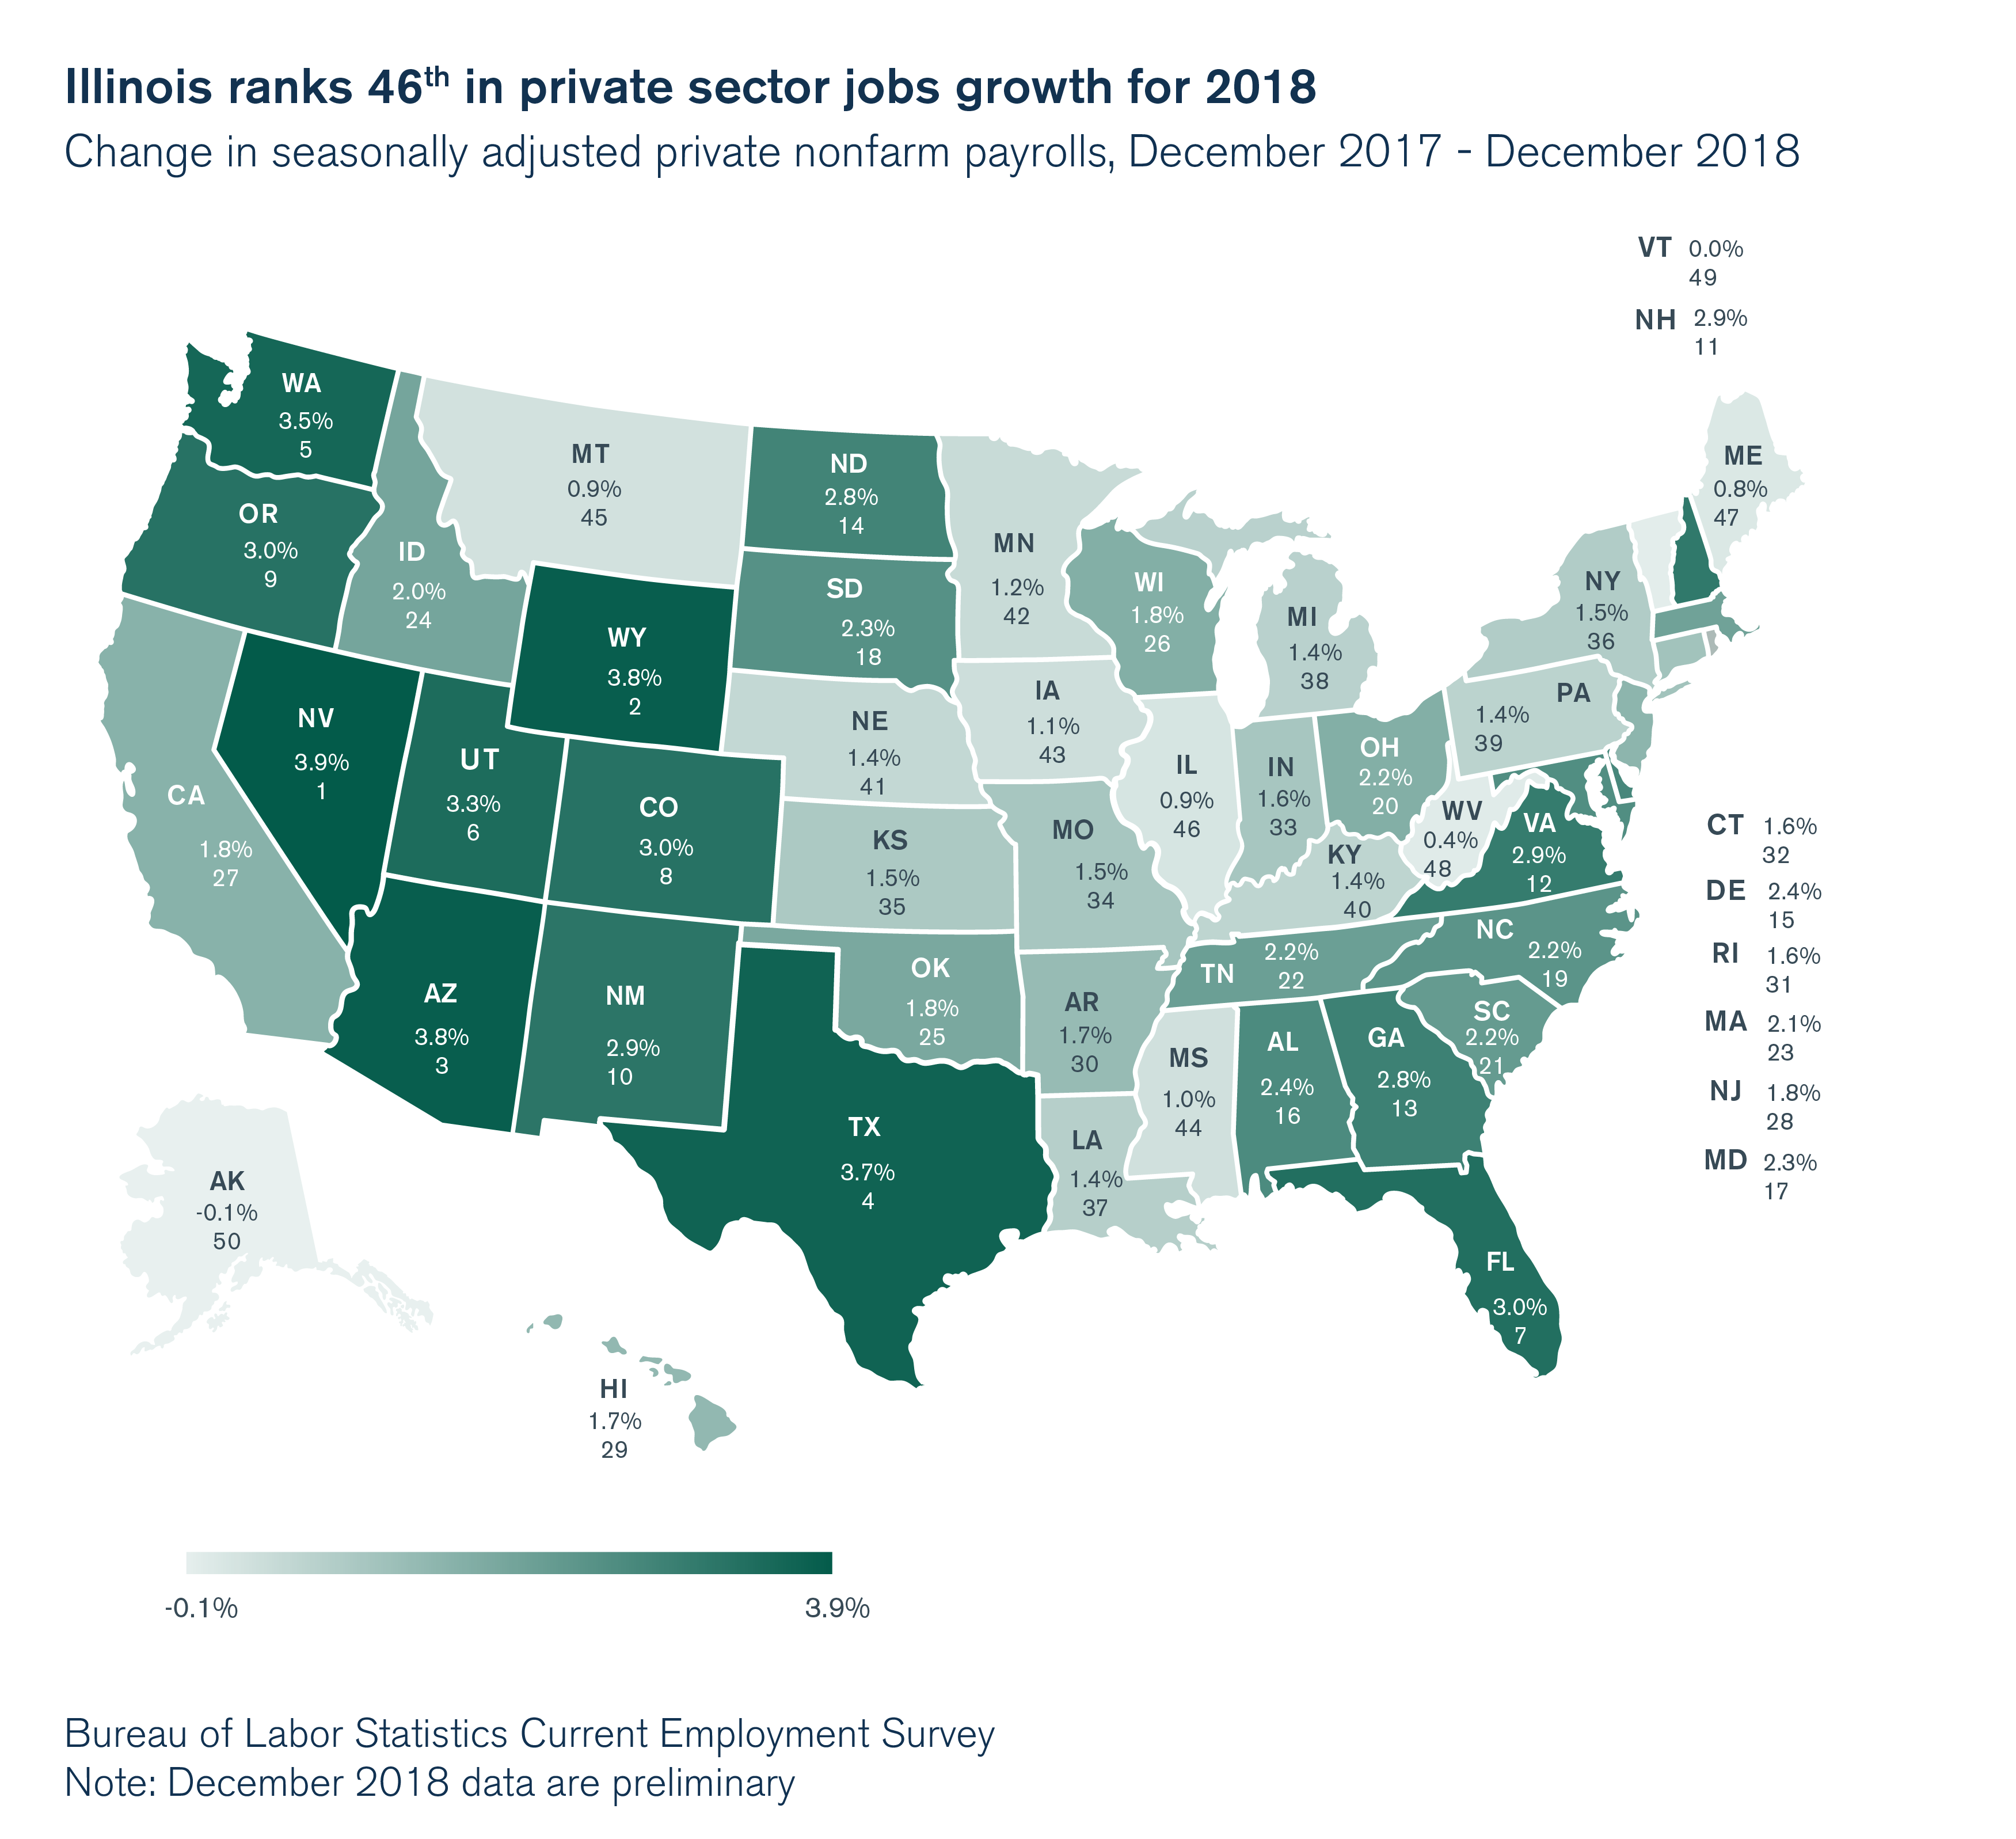 Illinois ranks 46th in private sector jobs growth for 2018